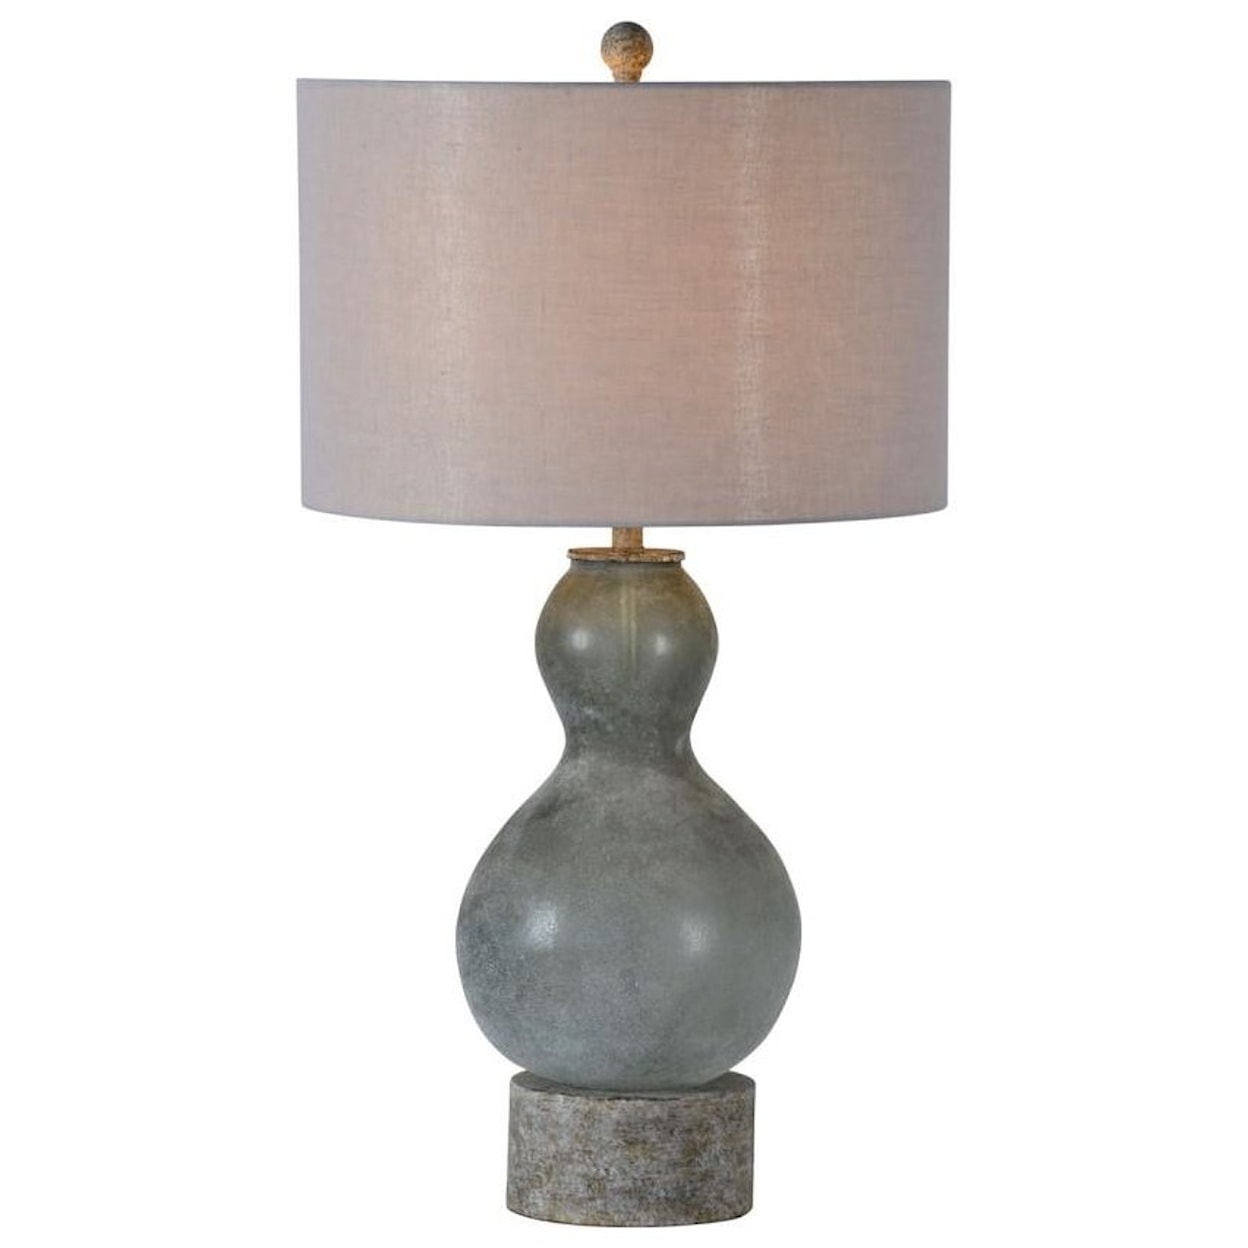 Forty West Designs Lamps Amora Table Lamp